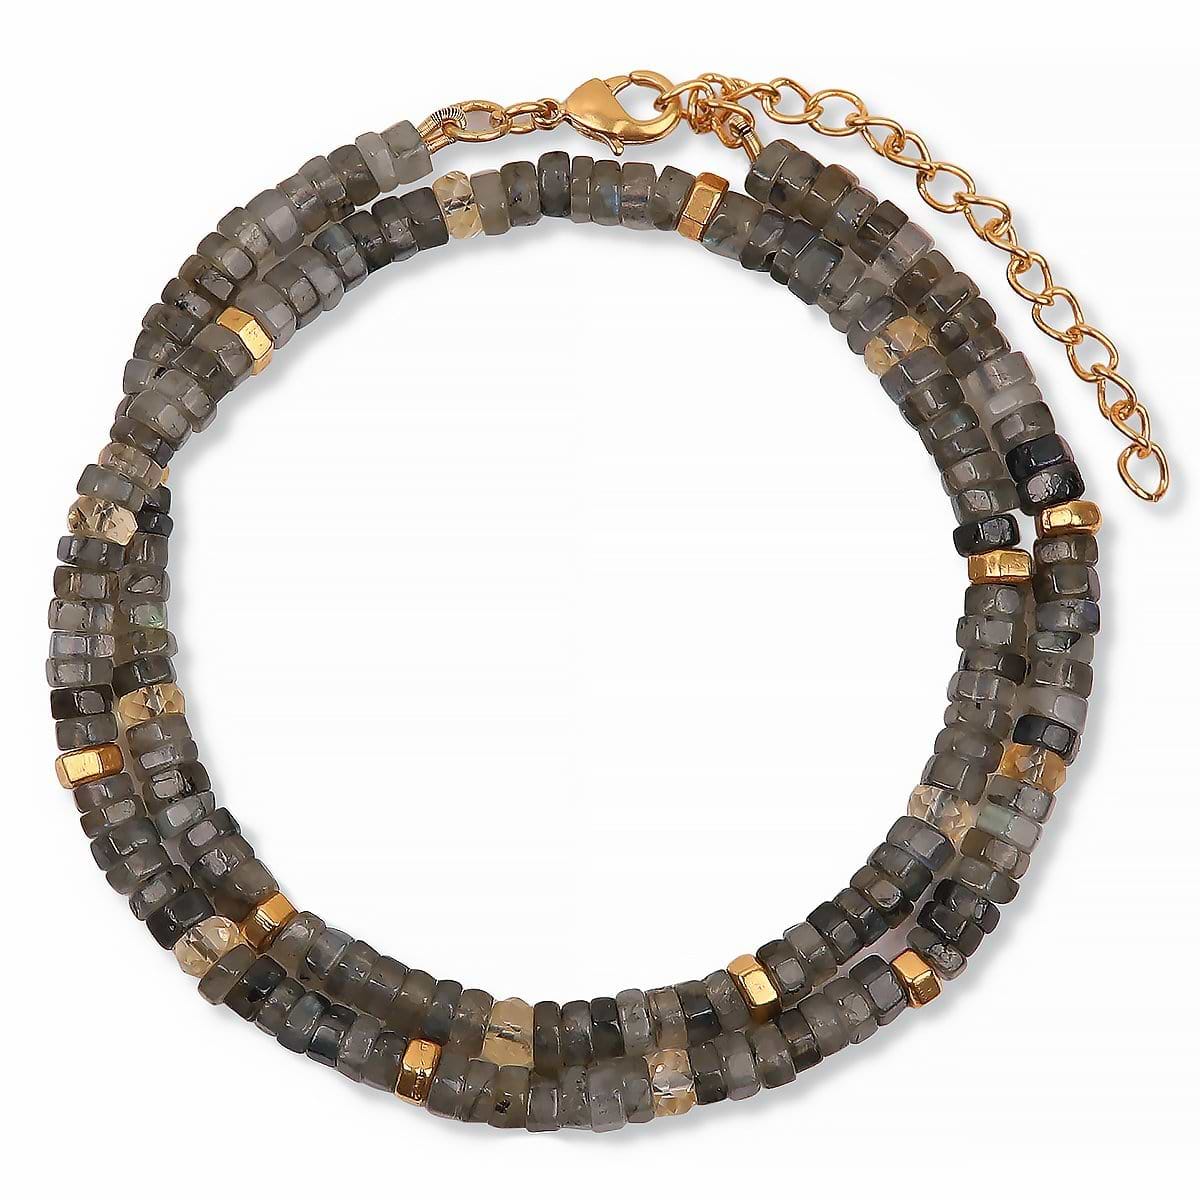 Karma and Luck  Necklace  -  "*Base Metal:- Brass  *Gold Plated  Make as Choker Necklace 14-16 inches    Gemstone:- Labradorite Hexagon Heishi 4mm with some Citrine sprinkled    *Lobster Lock"